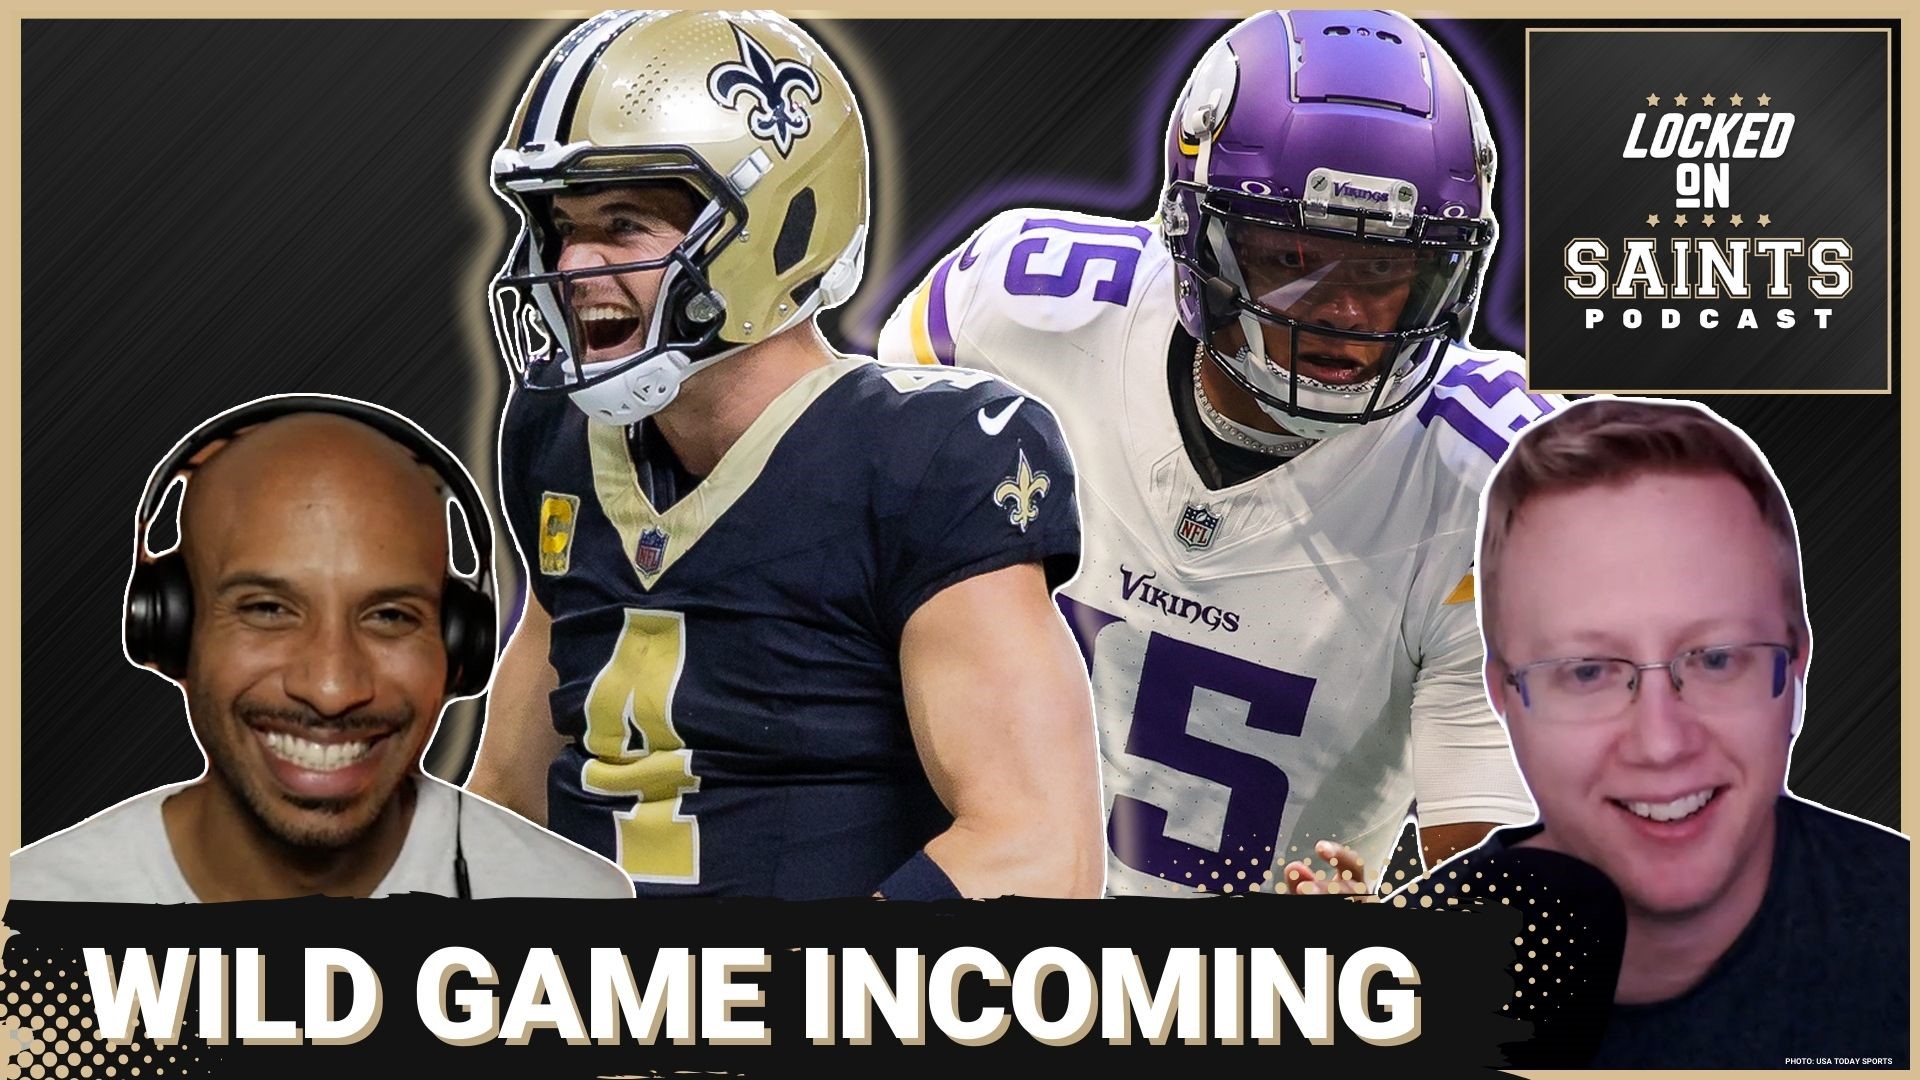 Derek Carr and the New Orleans Saints are traveling to take on Josh Dobbs and the Minnesota Vikings in an unpredictable matchup.